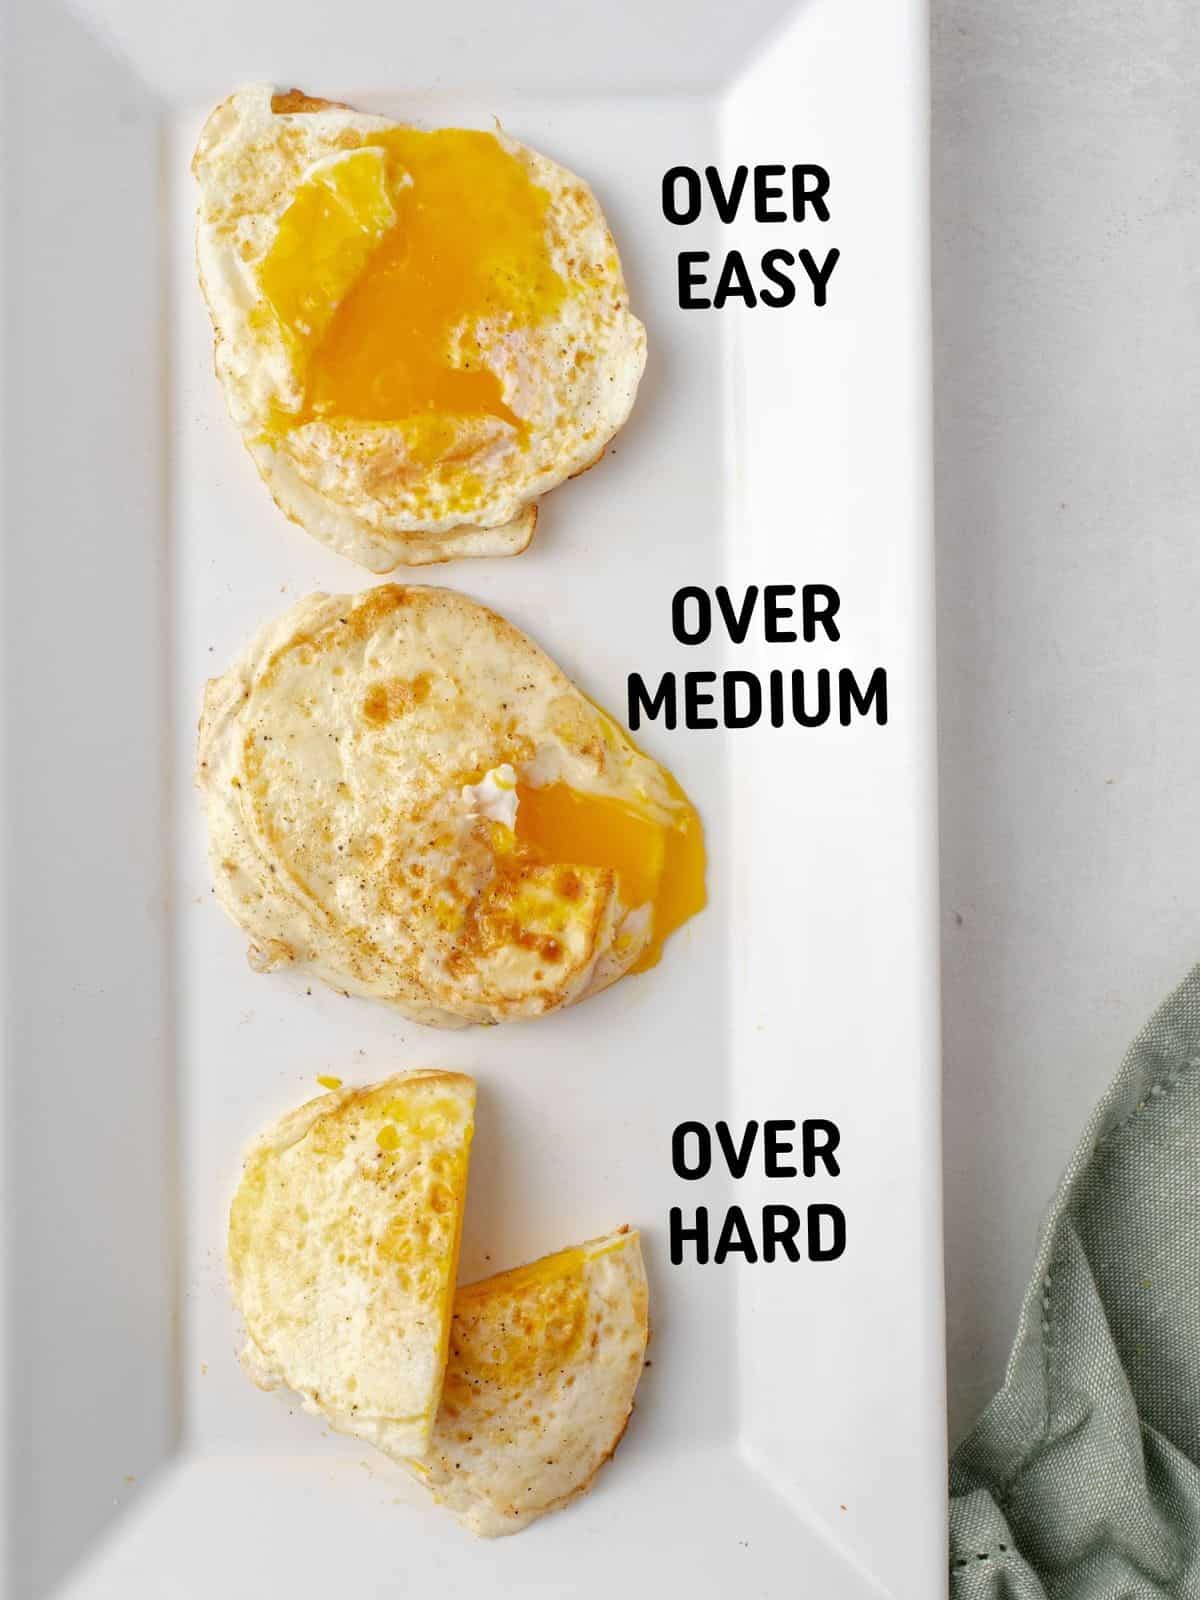 Labeled image showing three different egg preparations.